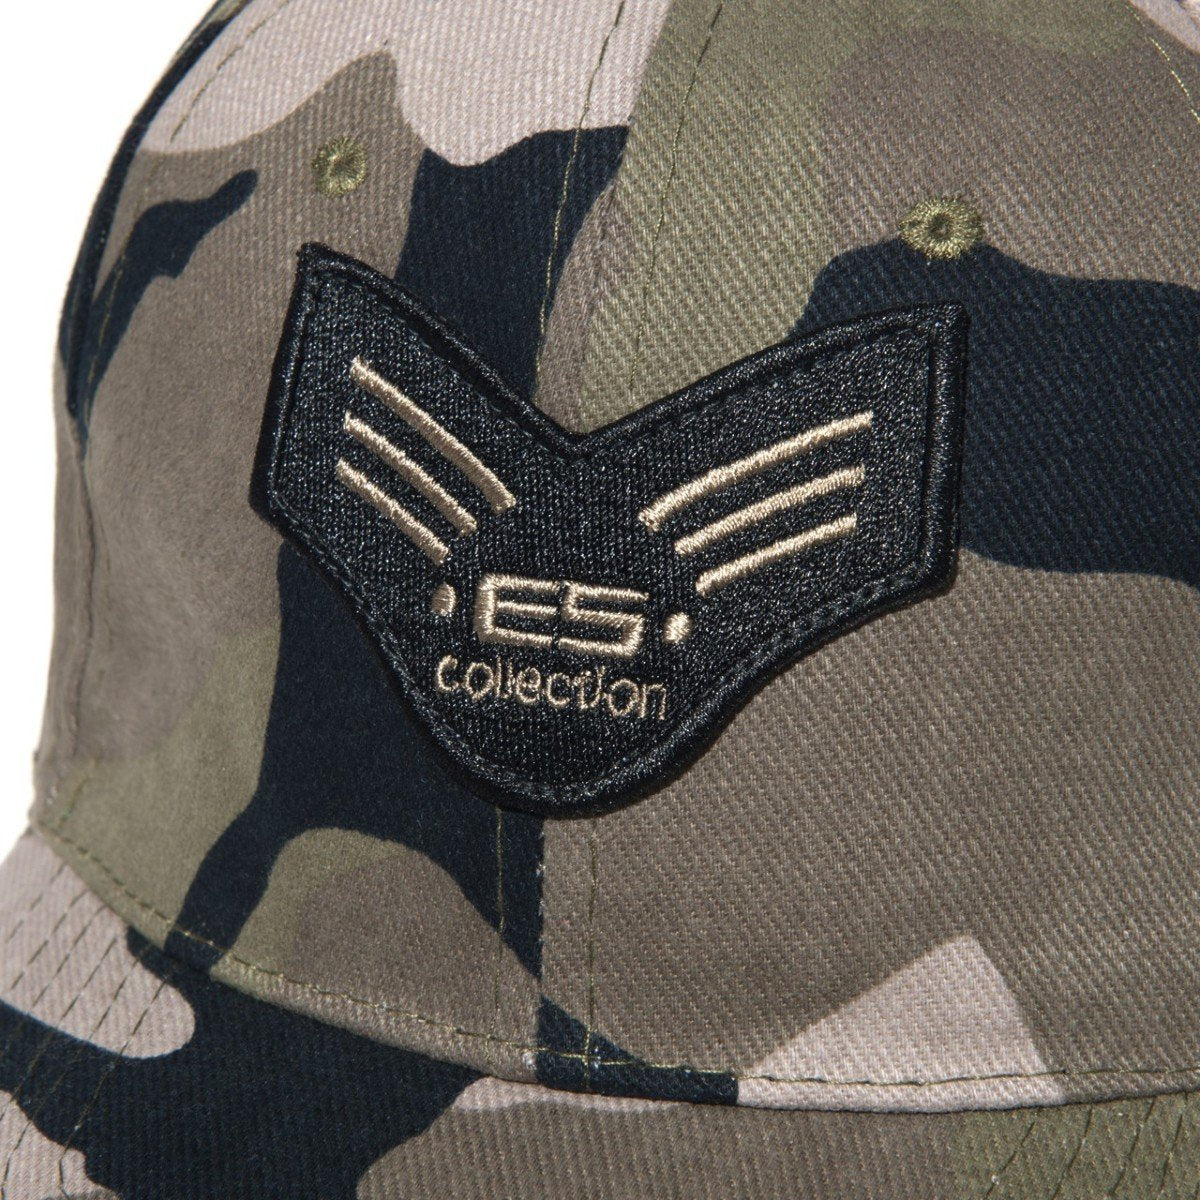 ES COLLECTION ARMY CAP - CAMOUFLAGE